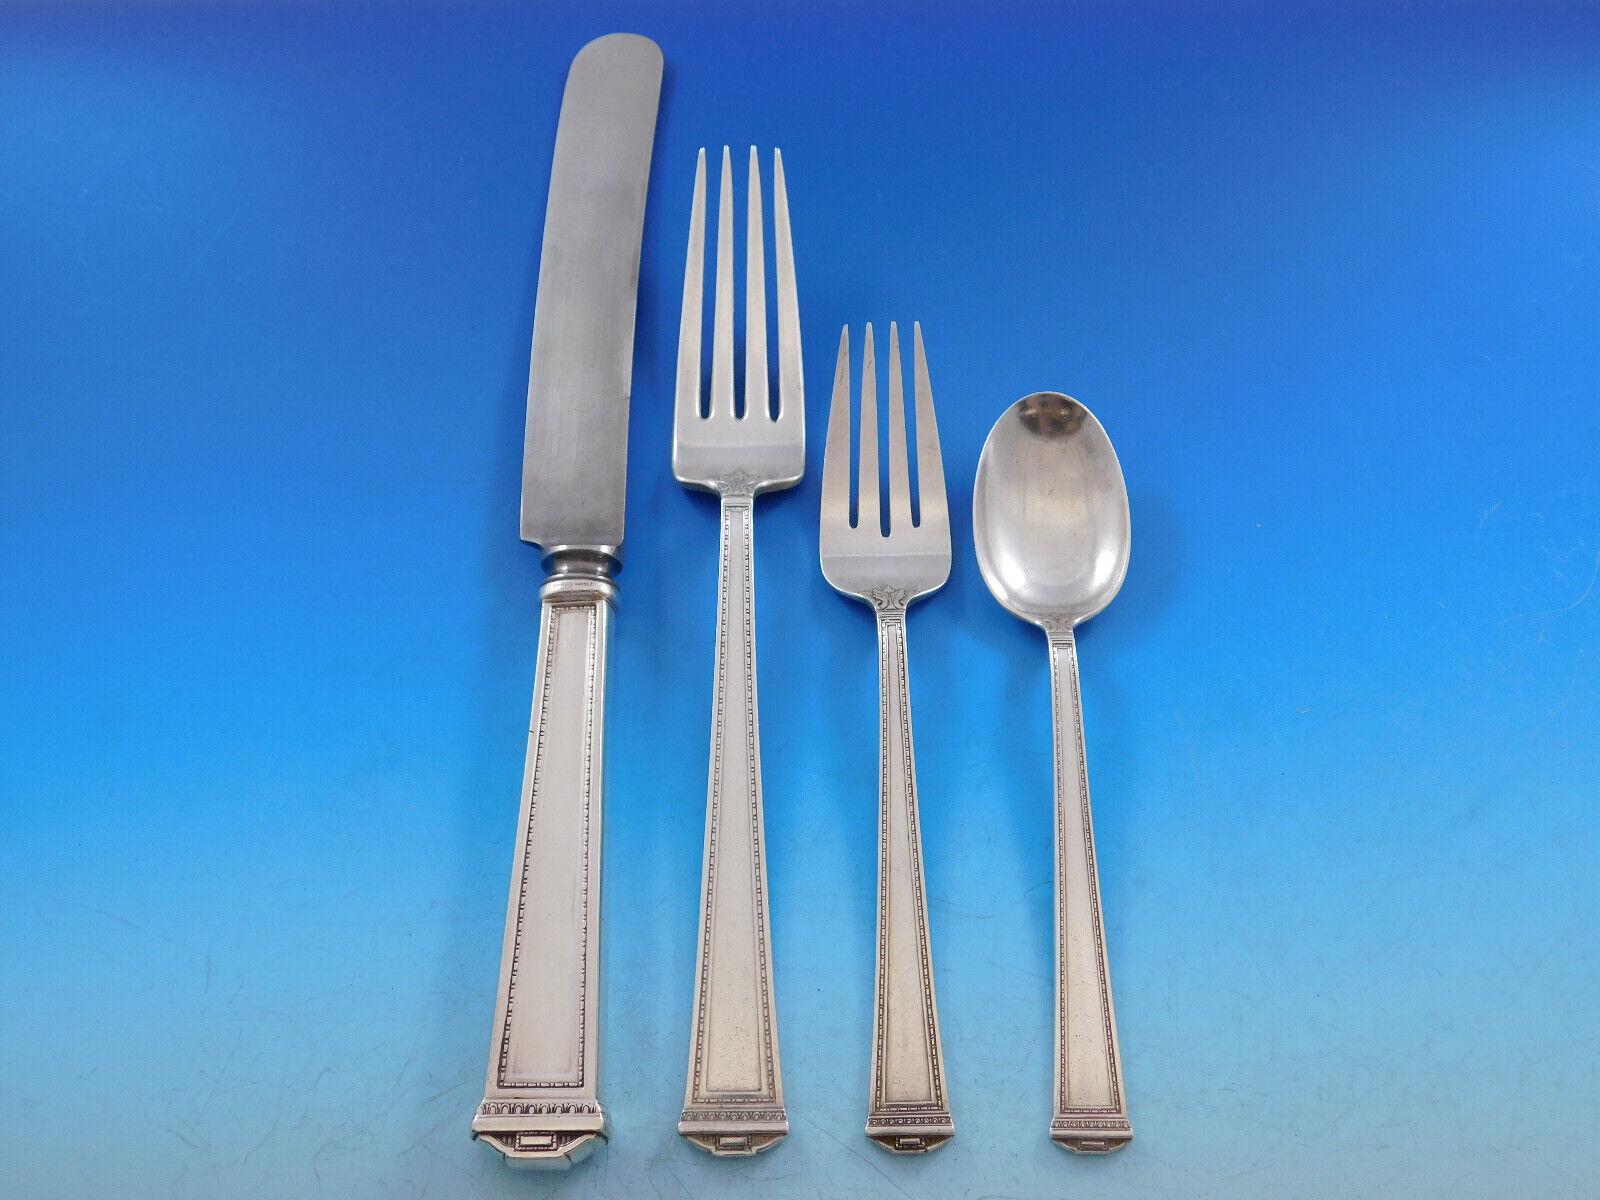 Dinner Size Pantheon by International sterling silver flatware set - 88 pieces. This set includes:

12 Dinner Size Knives, 9 3/4